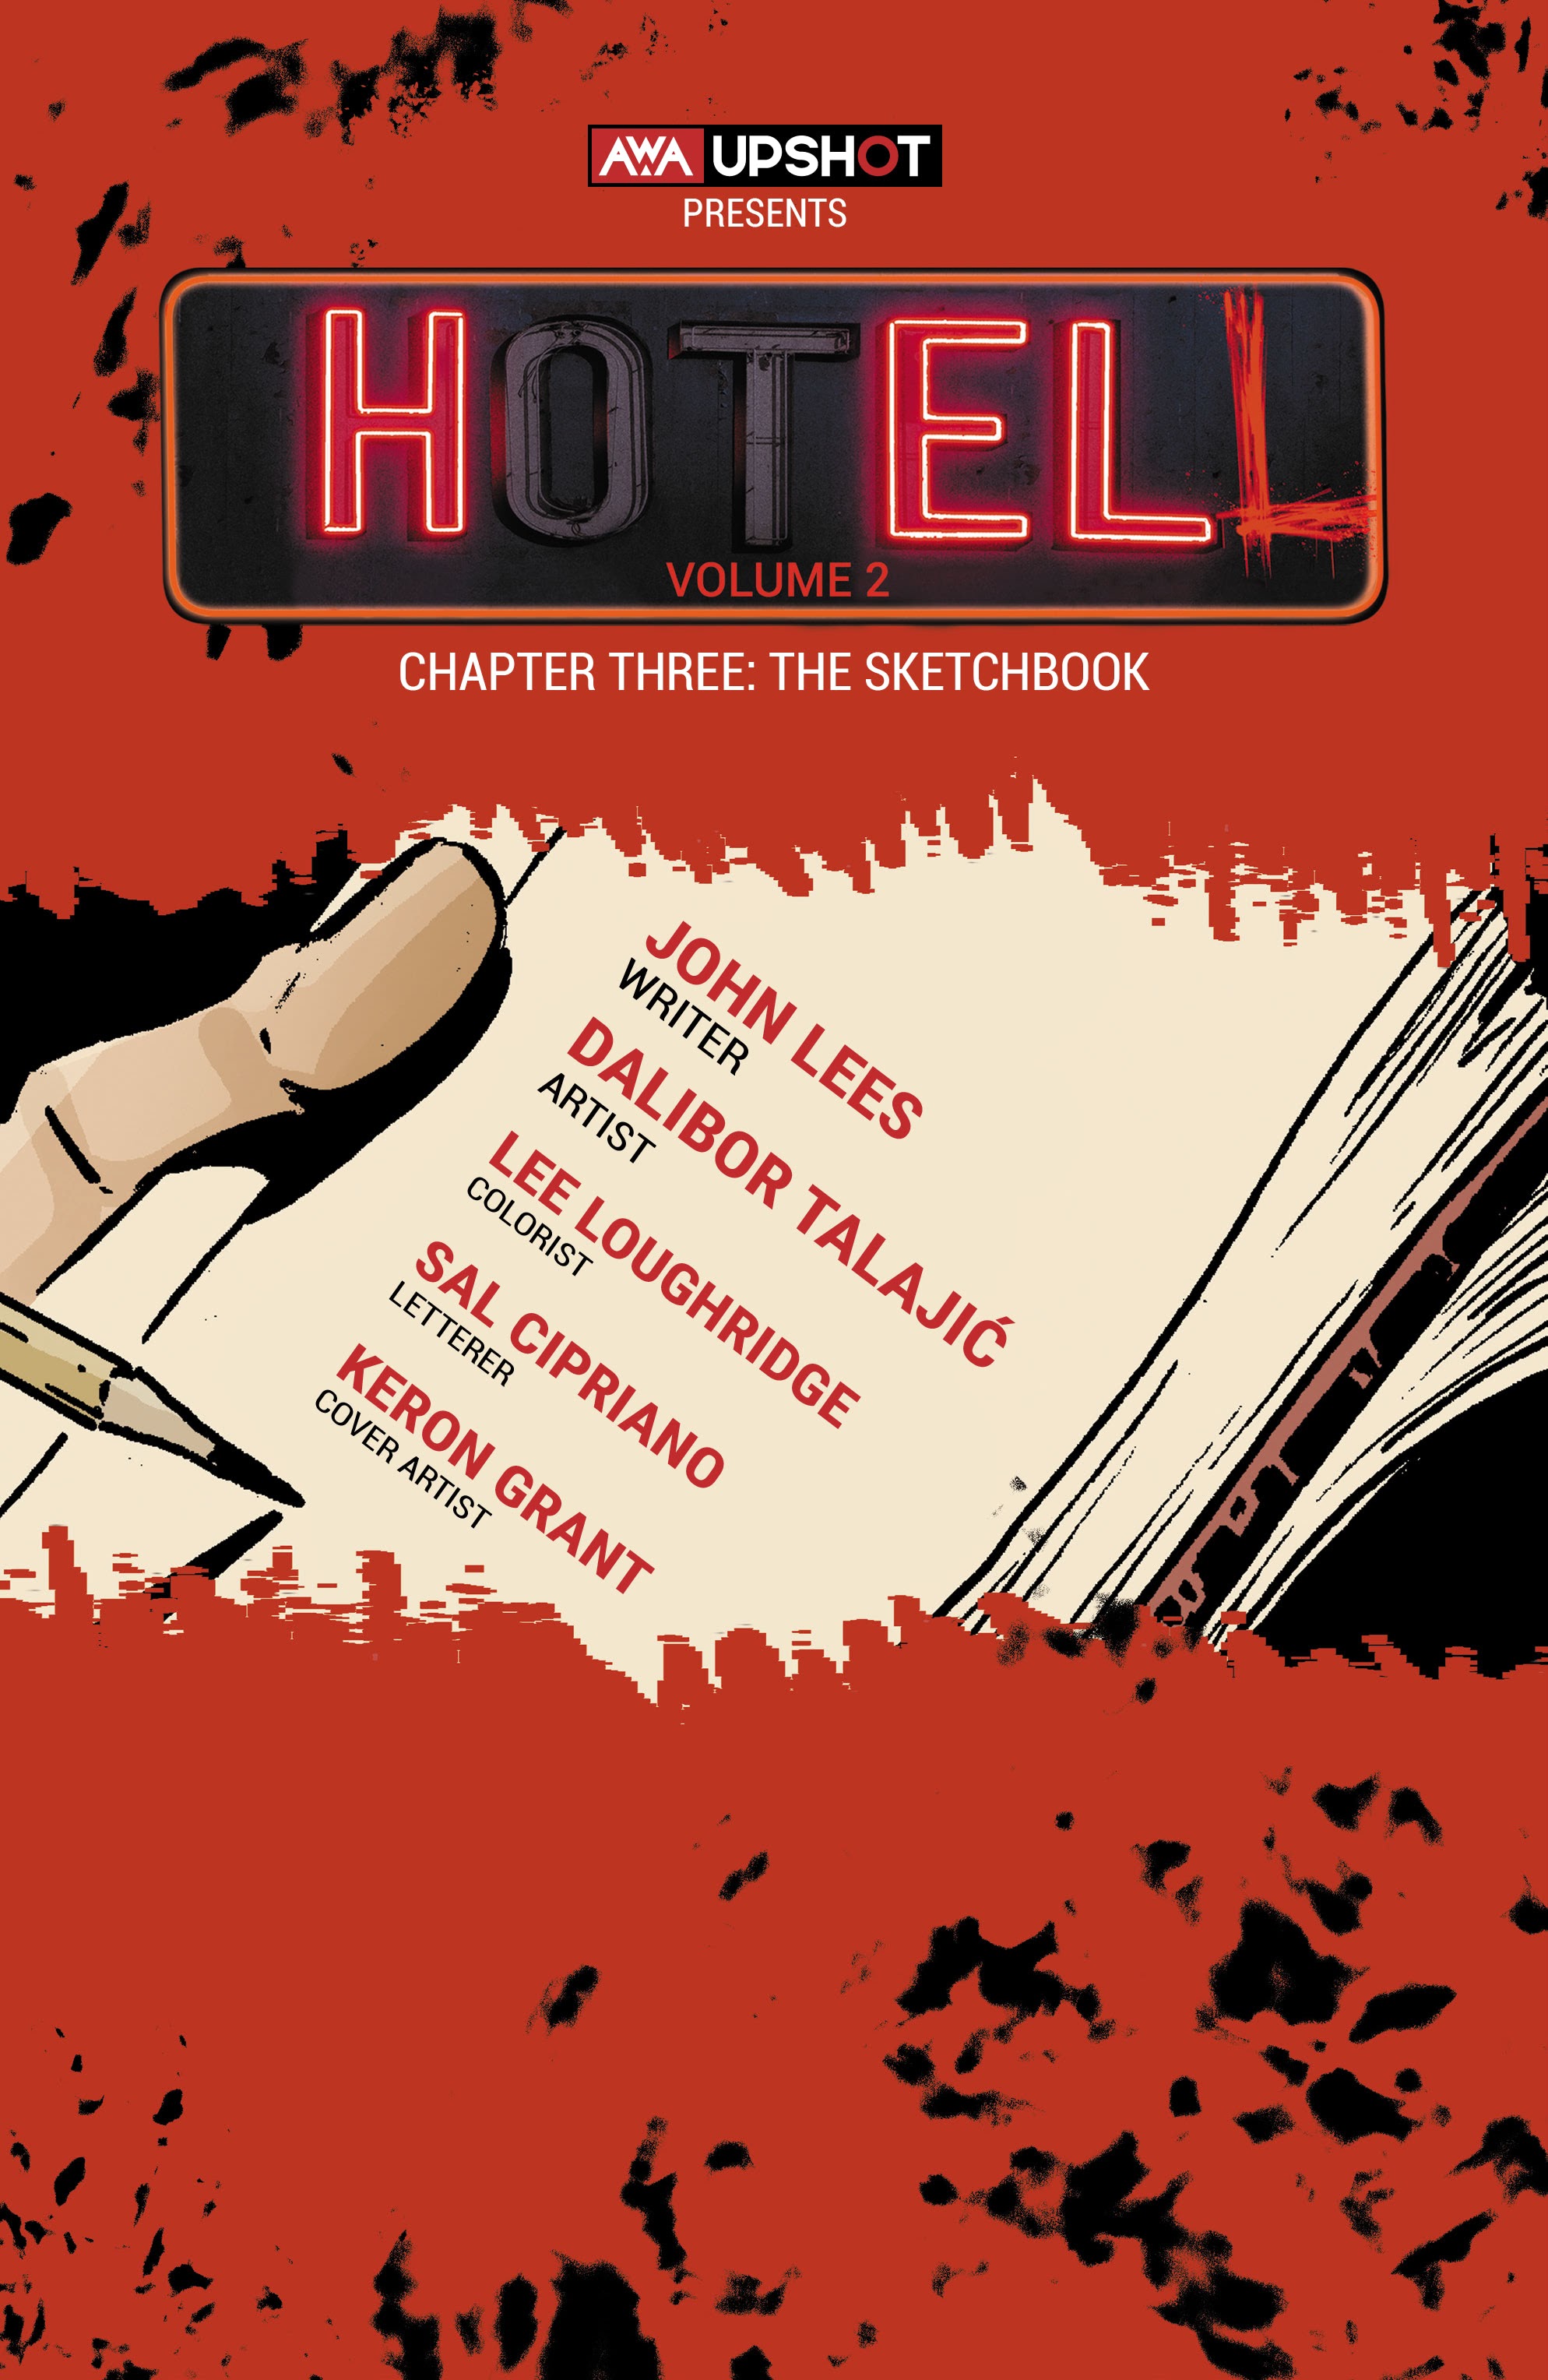 Read online Hotell Vol. 2 comic -  Issue #3 - 6